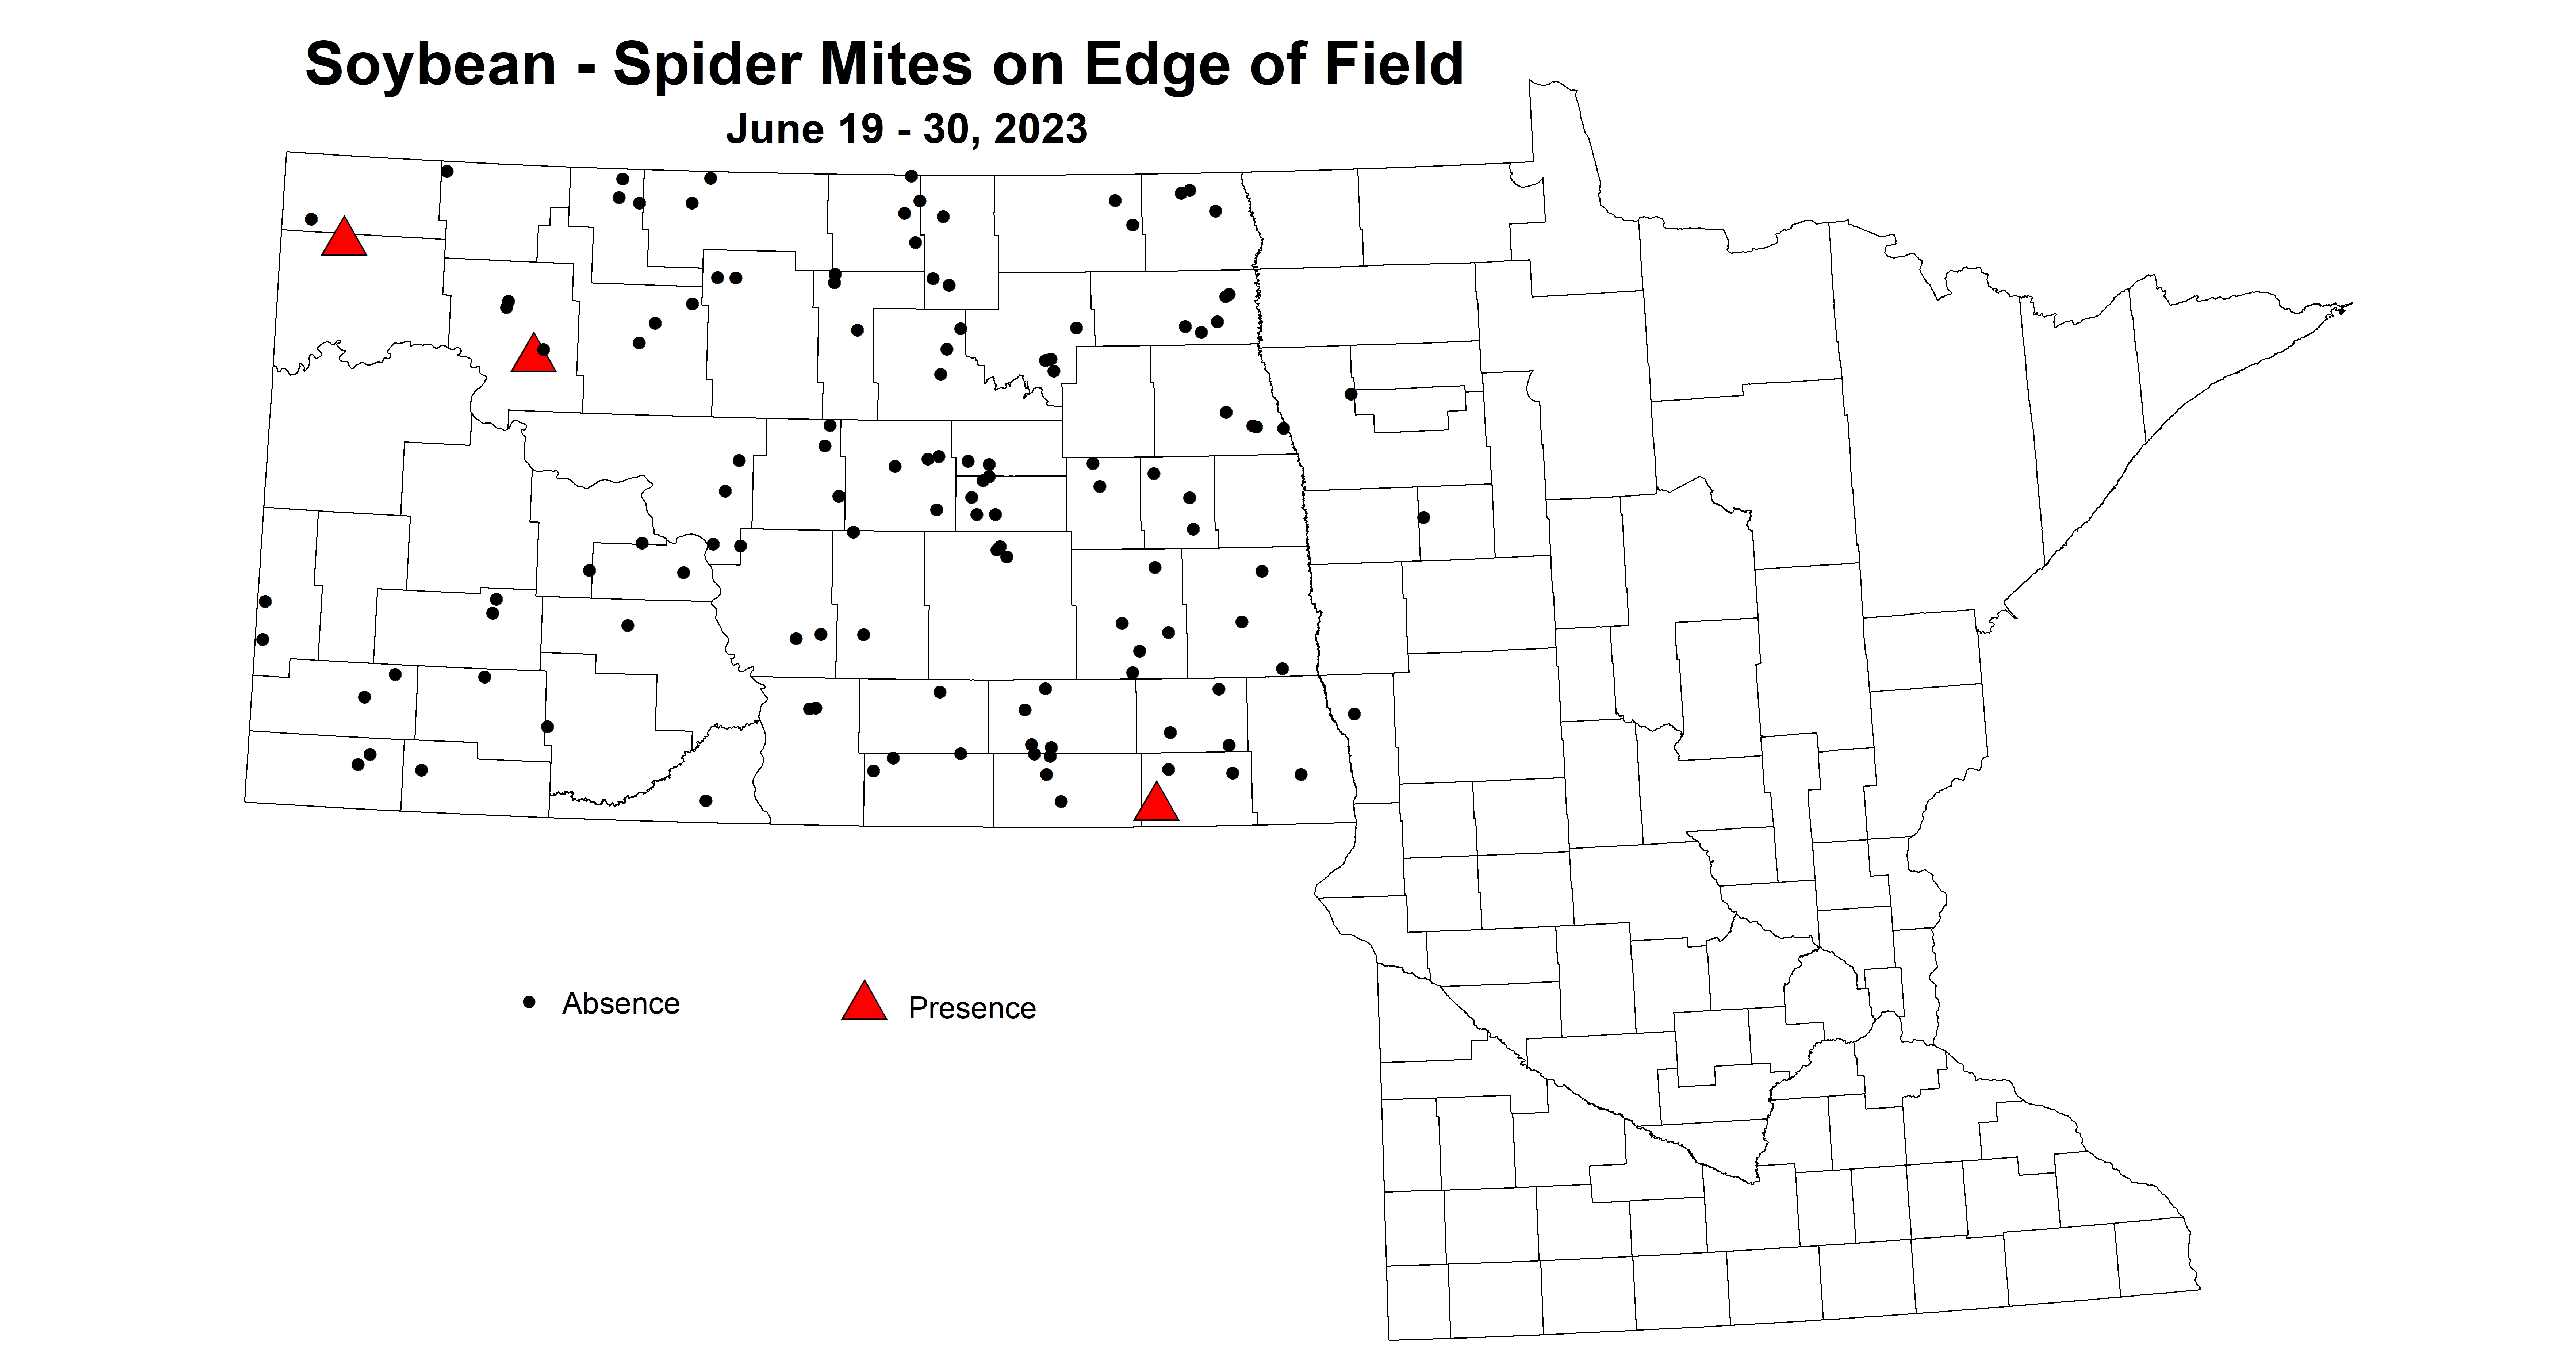 soybean spider mites on edge of field June 19-30 2023